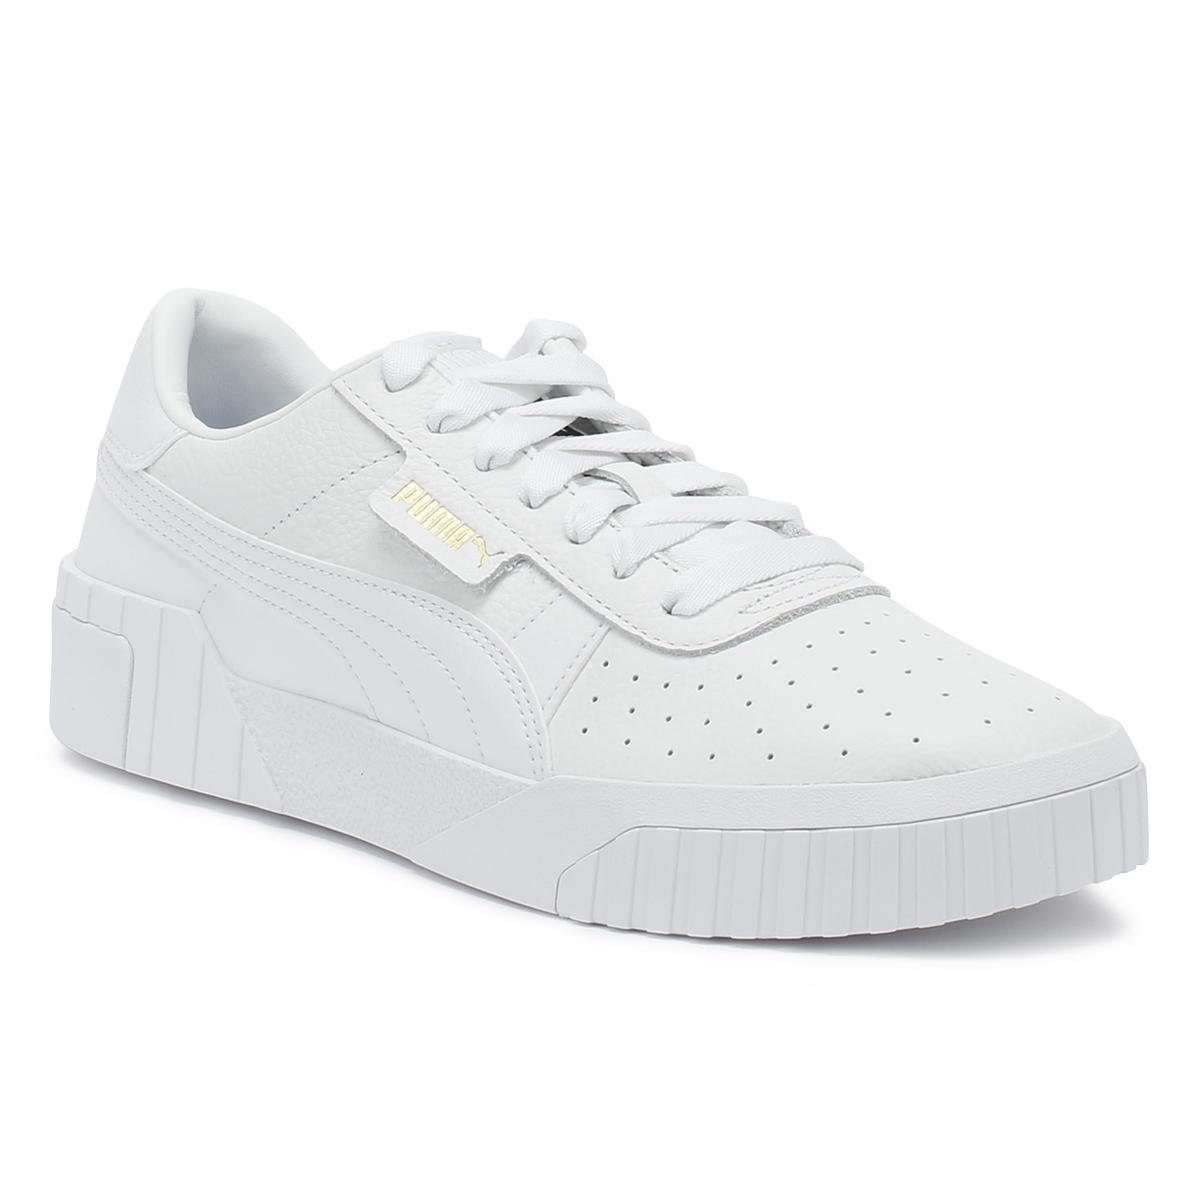 PUMA Rubber Cali Platform Leather Sneakers in White - Lyst